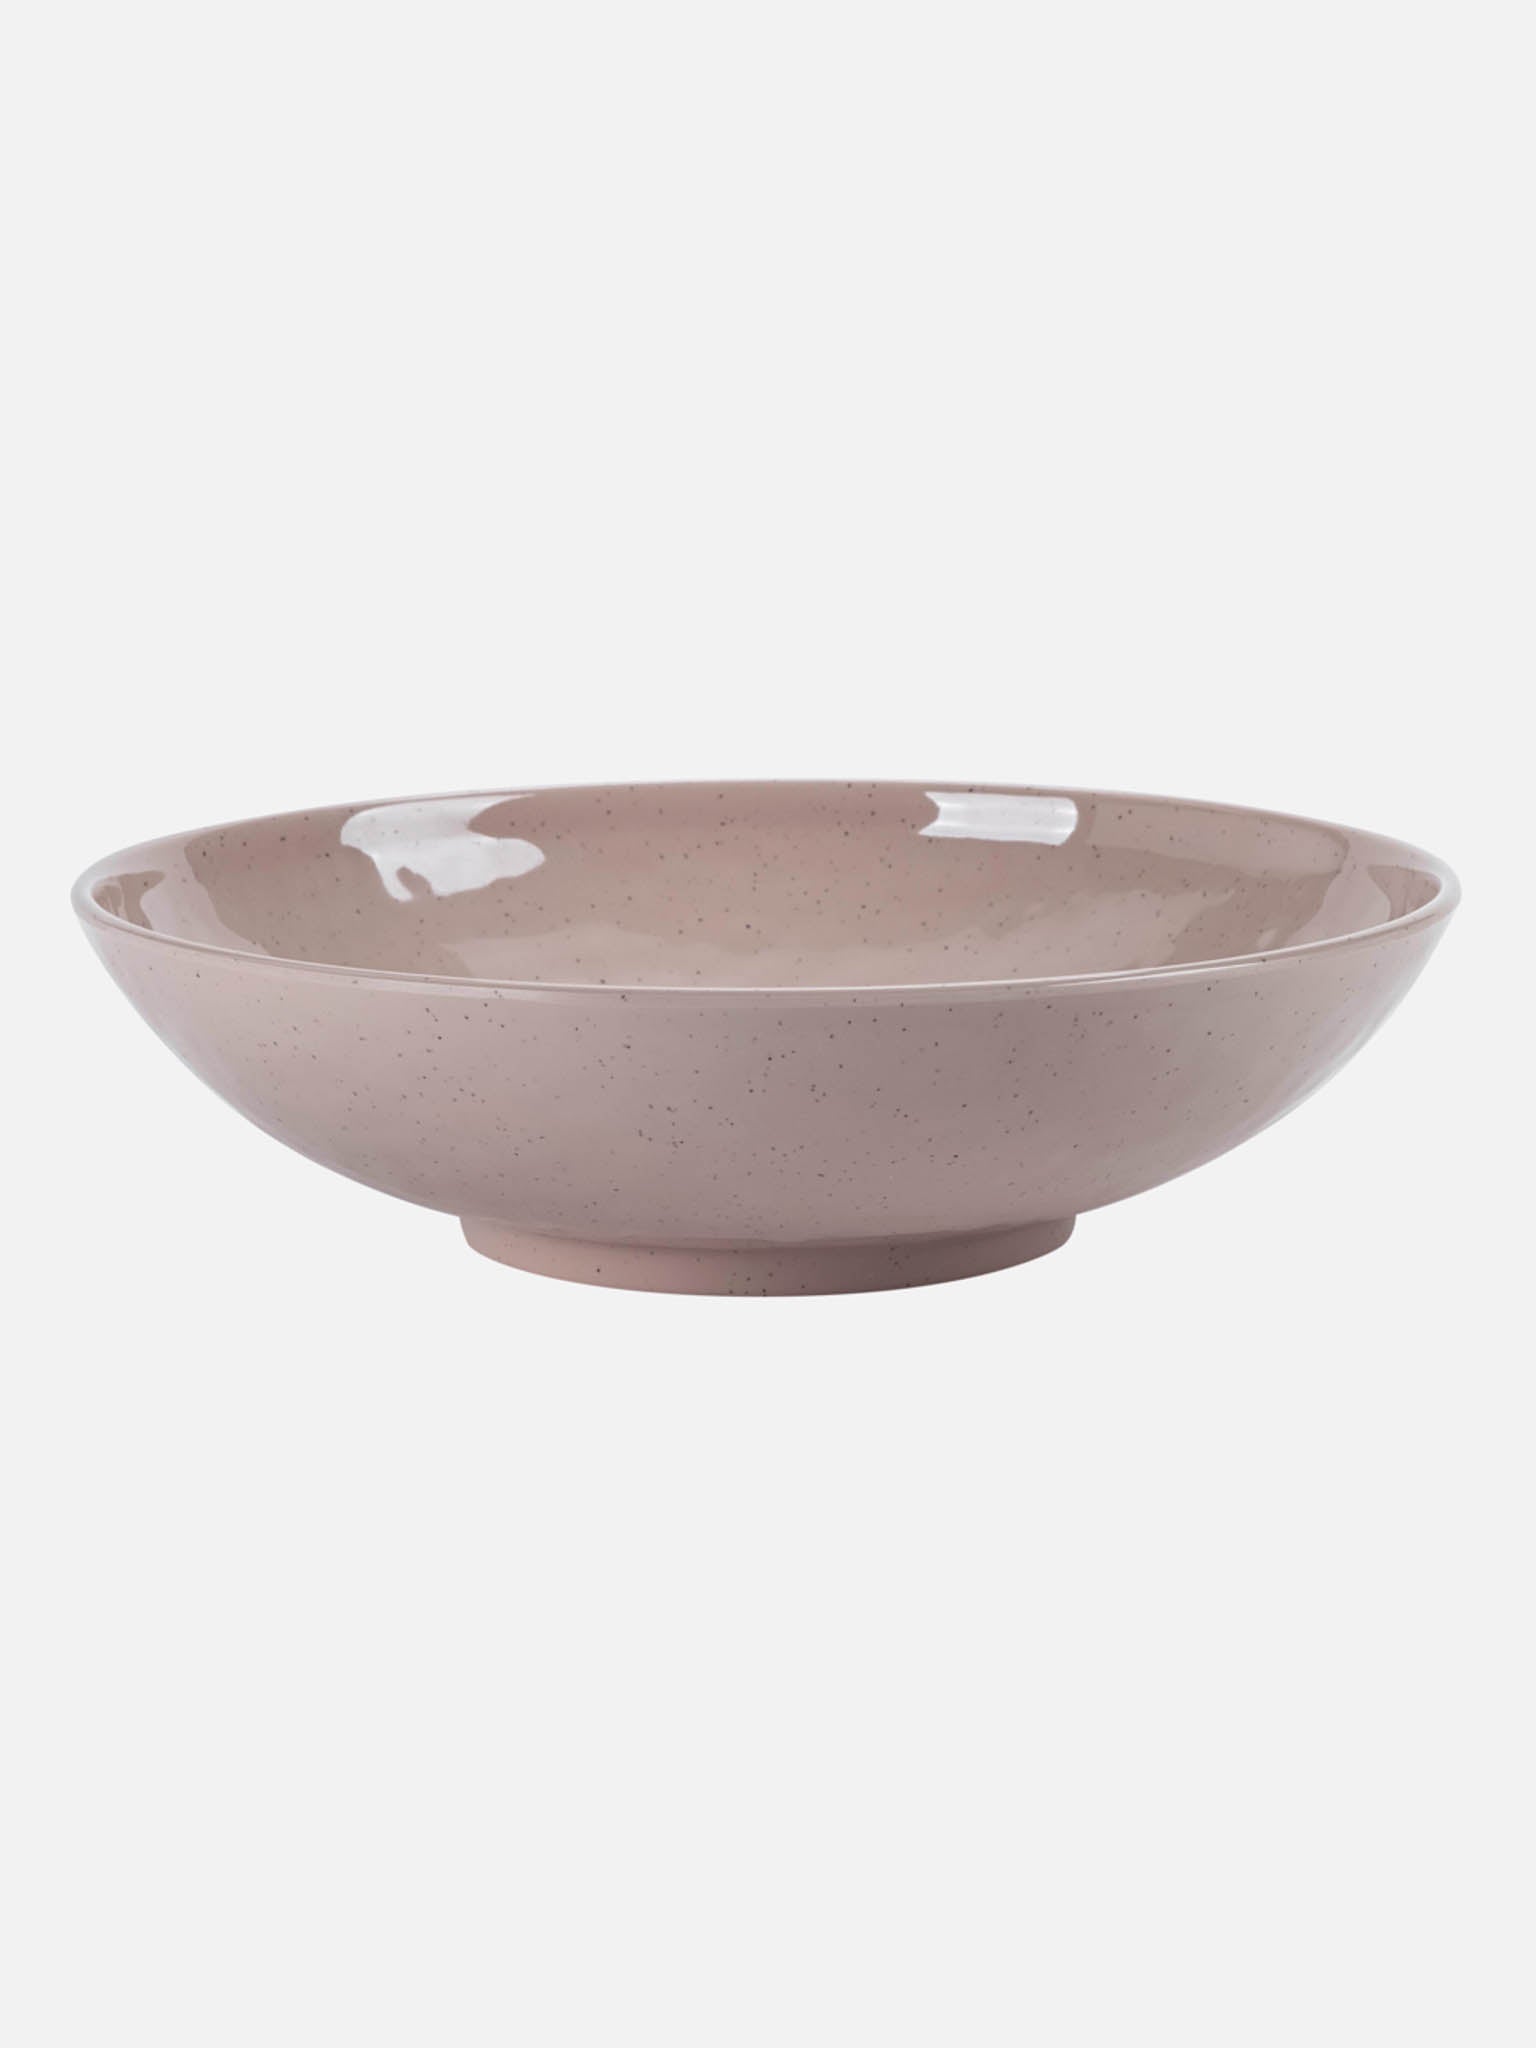 Daily Serving Bowl - large